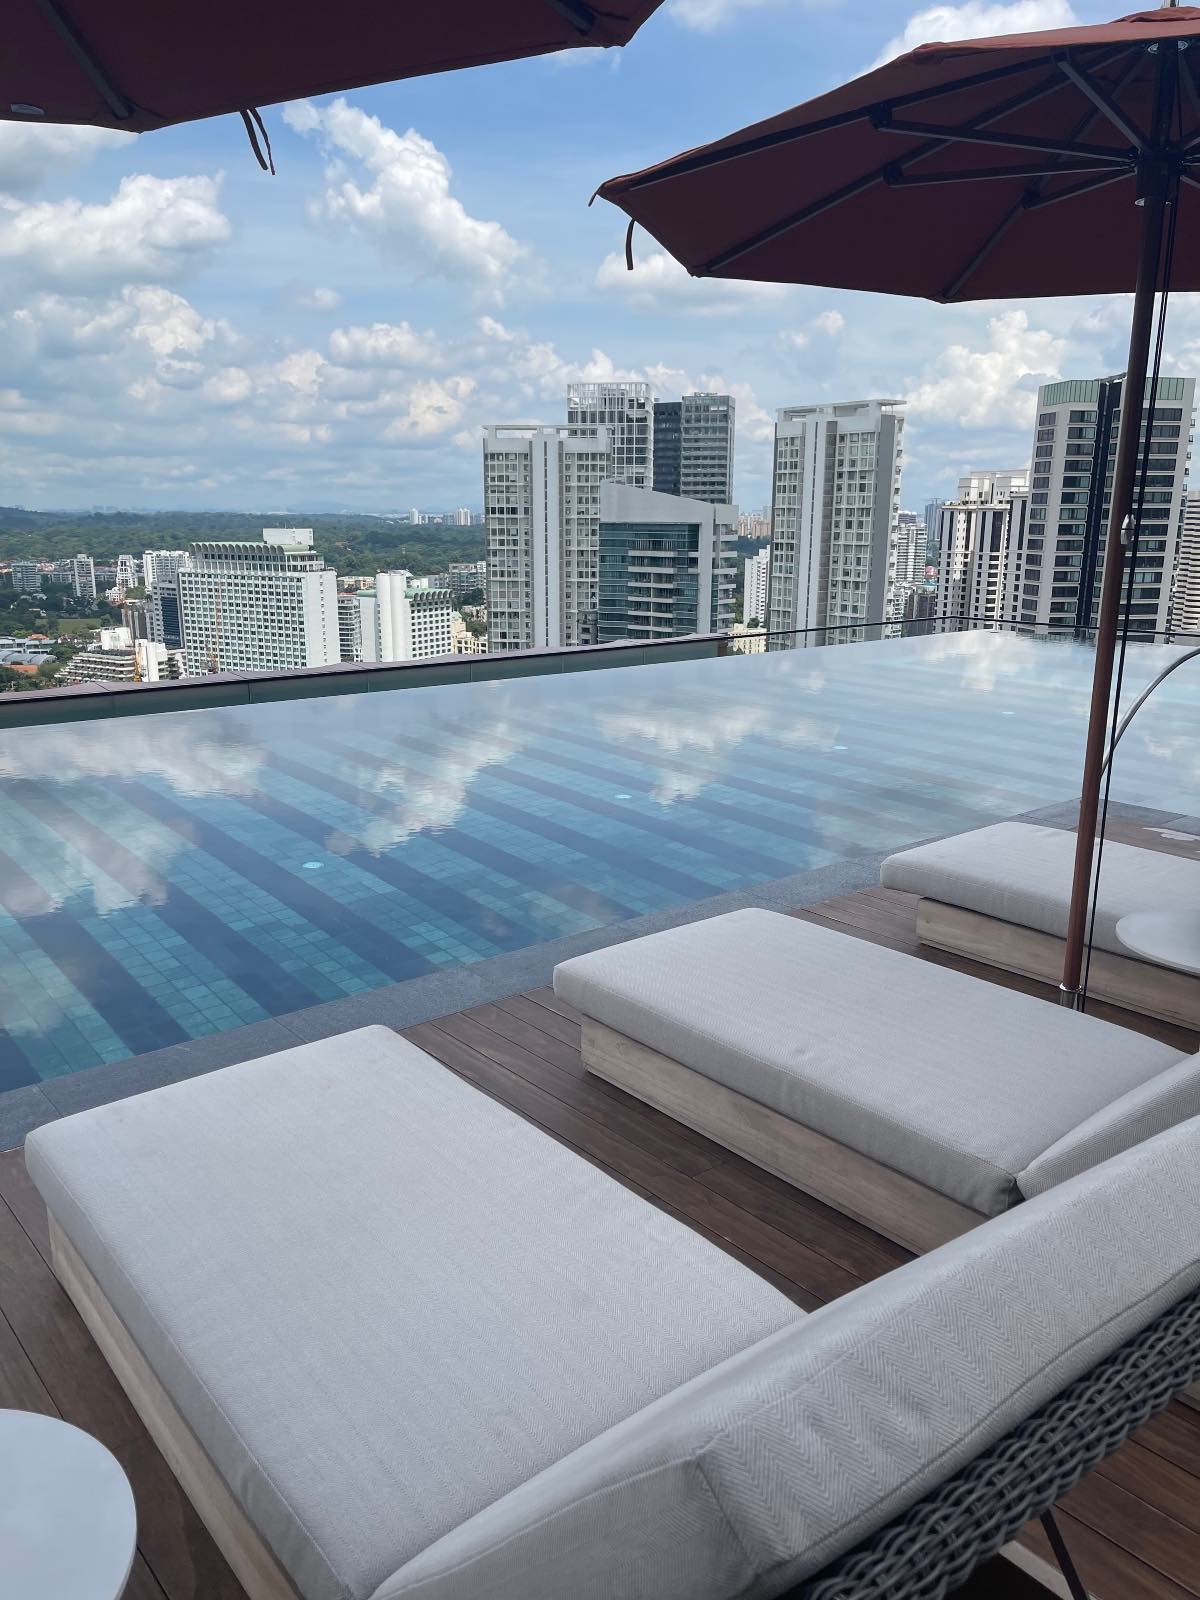 , Relax in Artyzen Singapore’s sky terraces, orchid gardens and cantilevered infinity pool